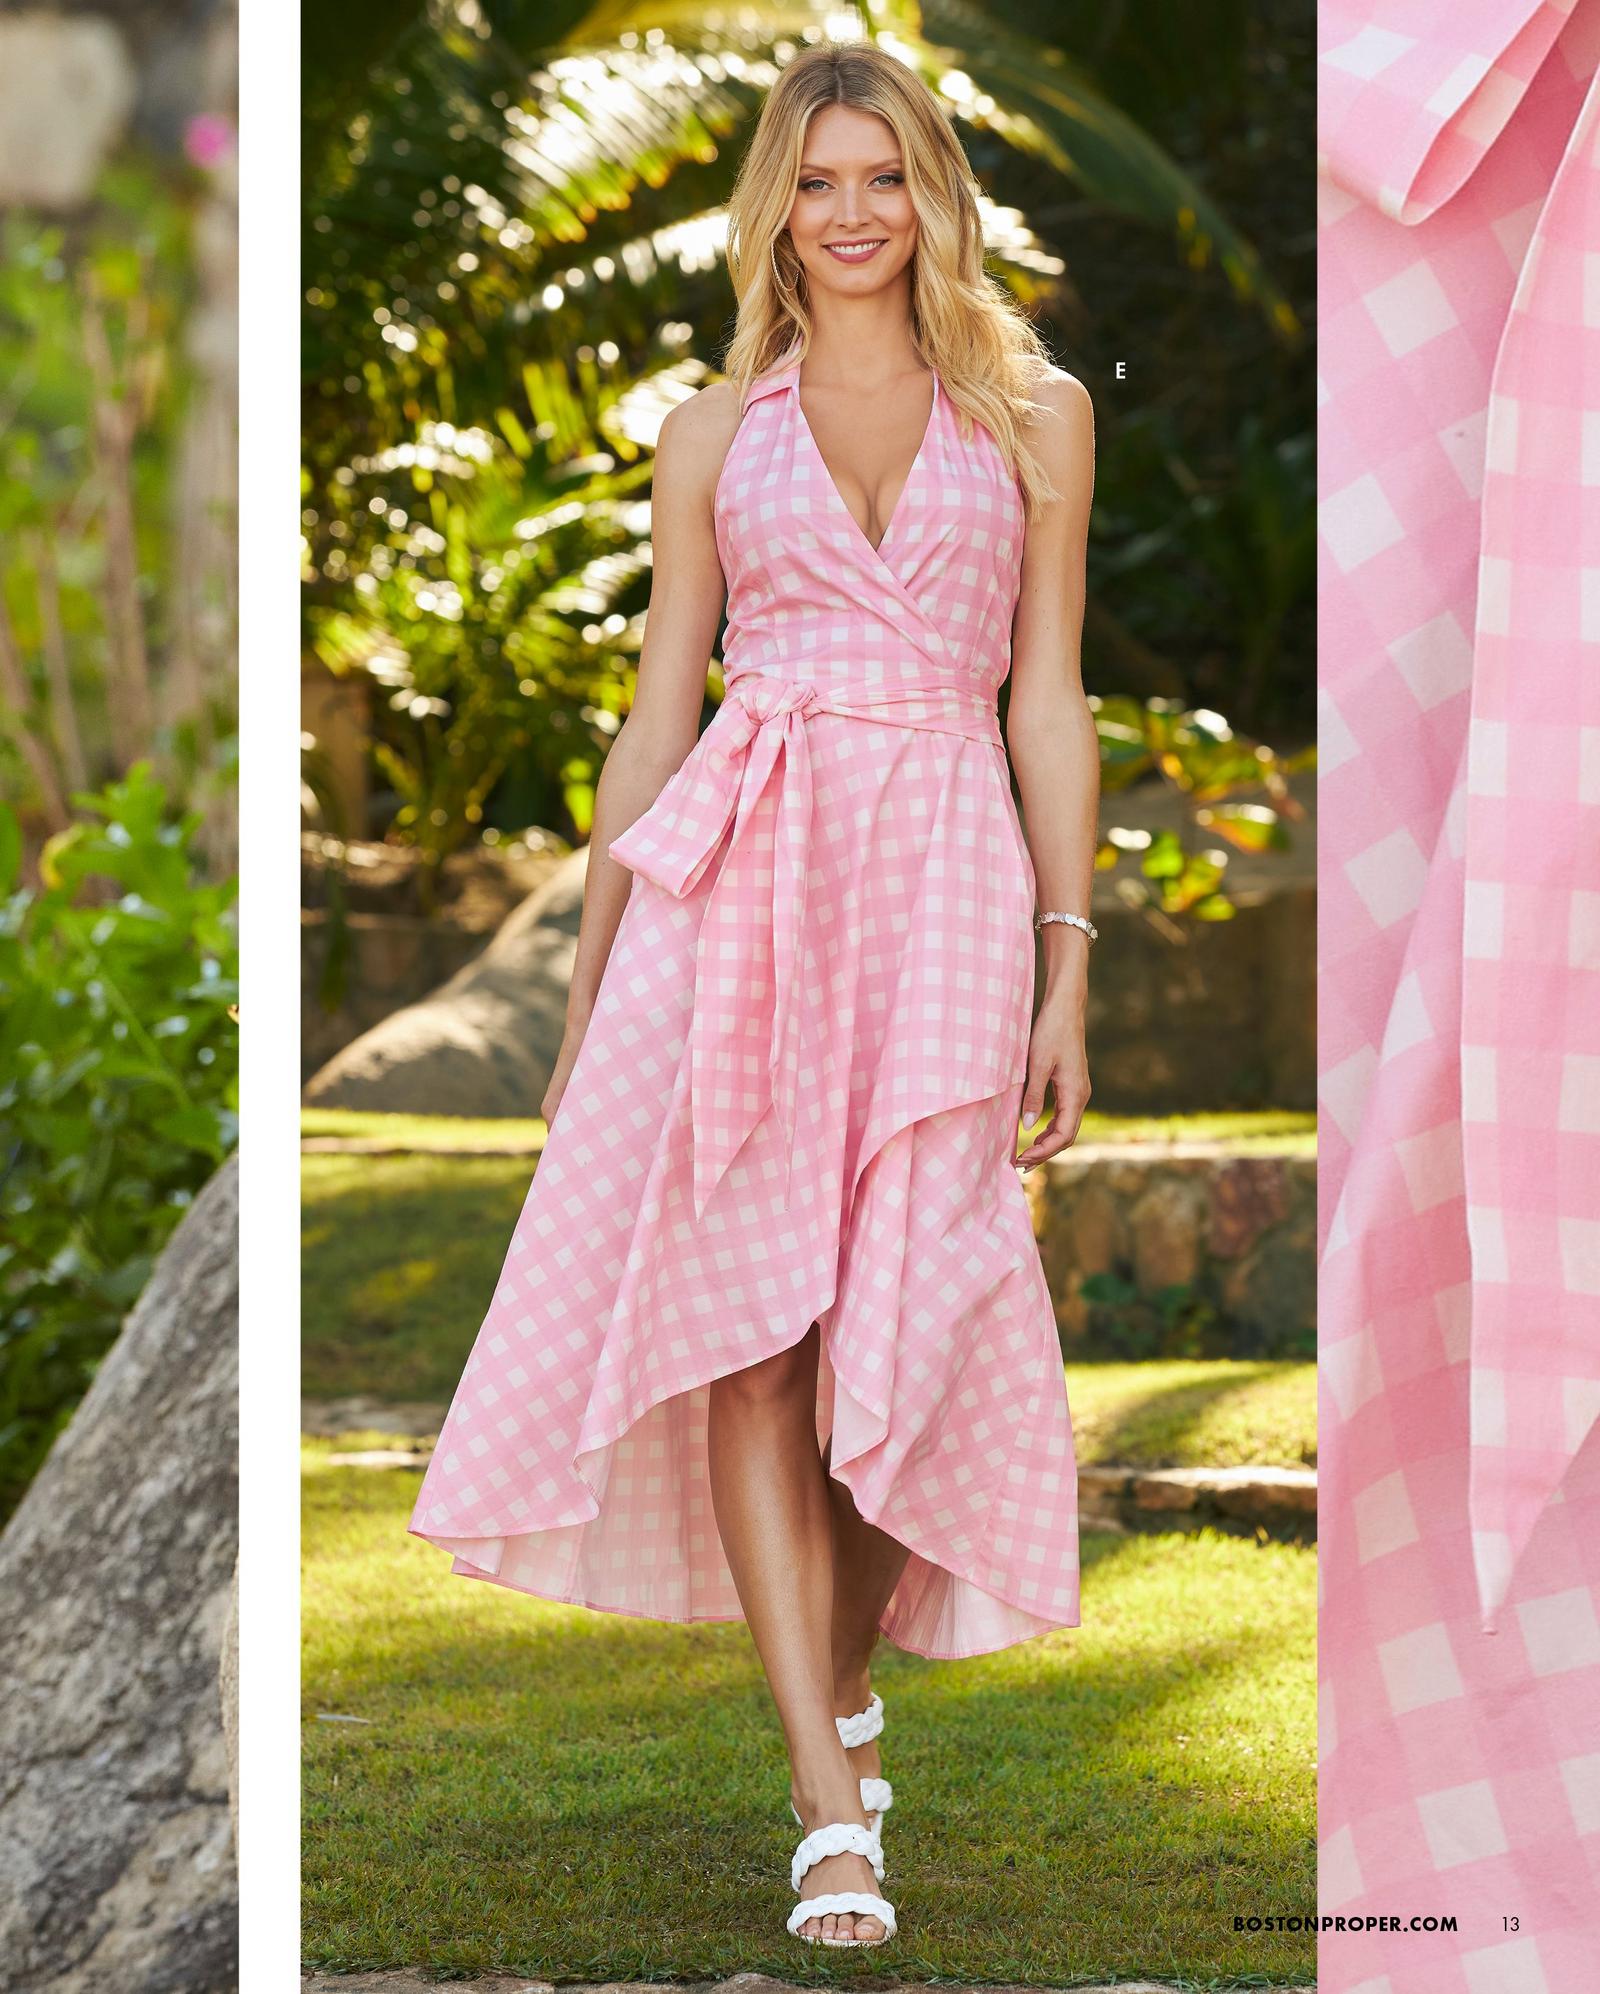 model wearing a pink and white gingham halter neck high-low maxi dress and white braided sandals.